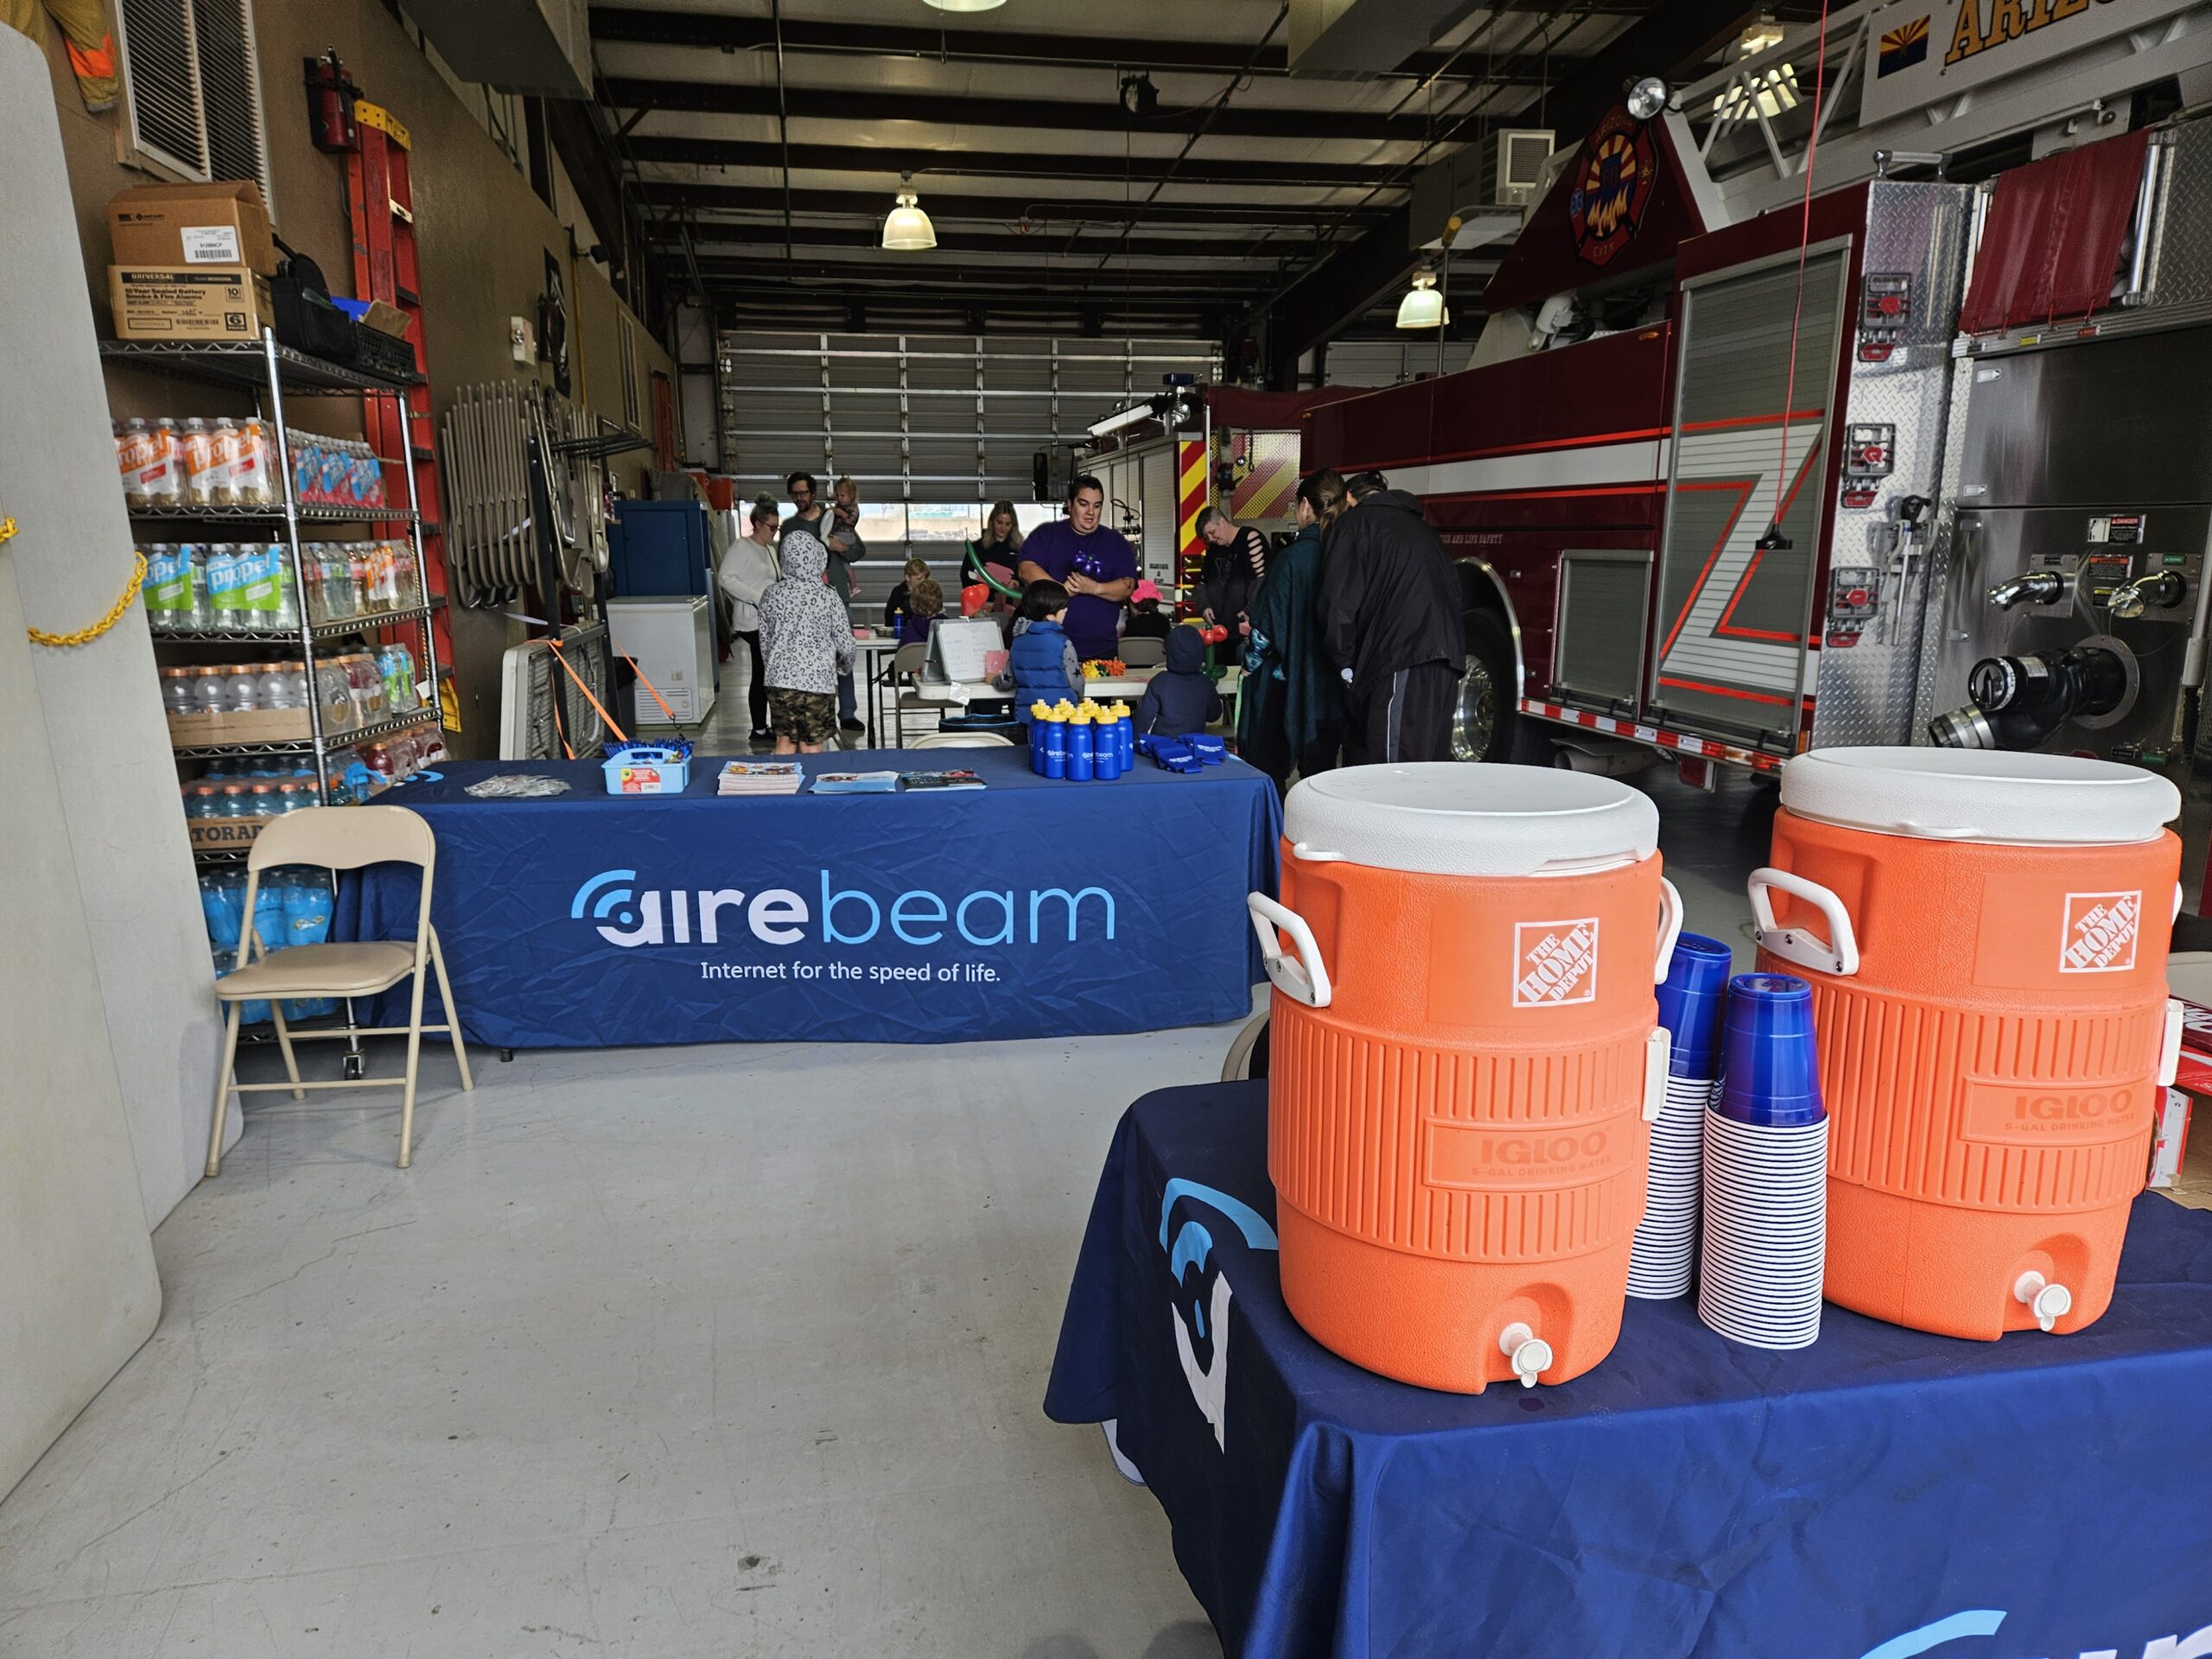 AireBeam hosted a Valentine’s Day Community Event at the Arizona City Fire Station on Saturday, February 10 where a number of activities were featured, including a balloon artist shown here.